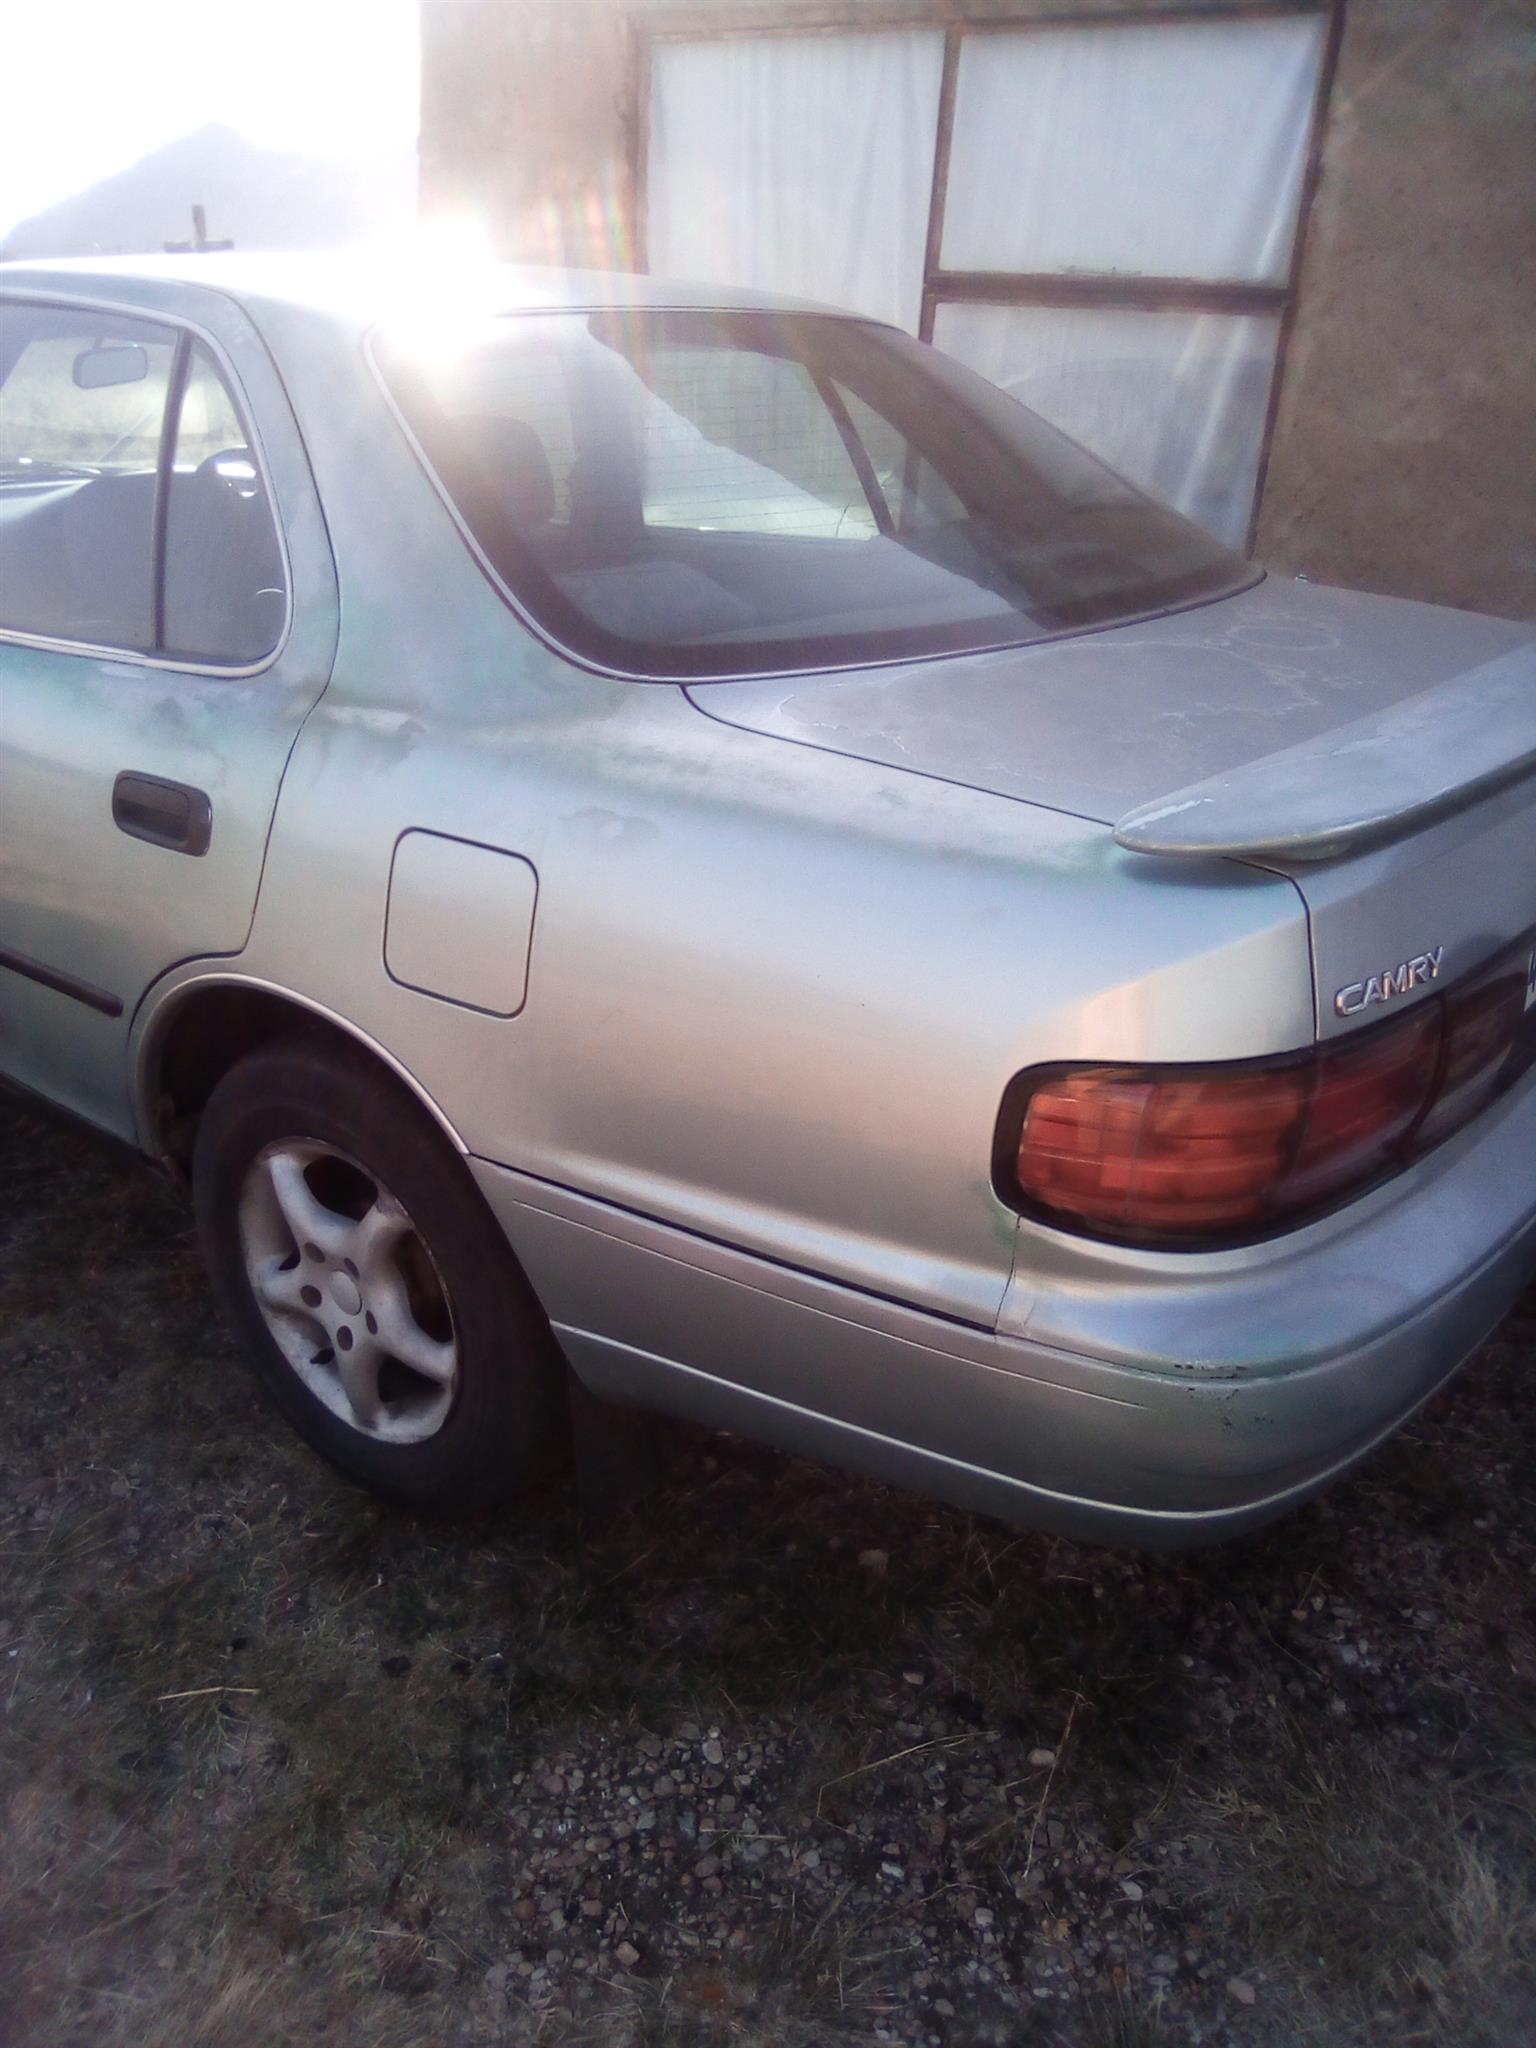 Camry for sale